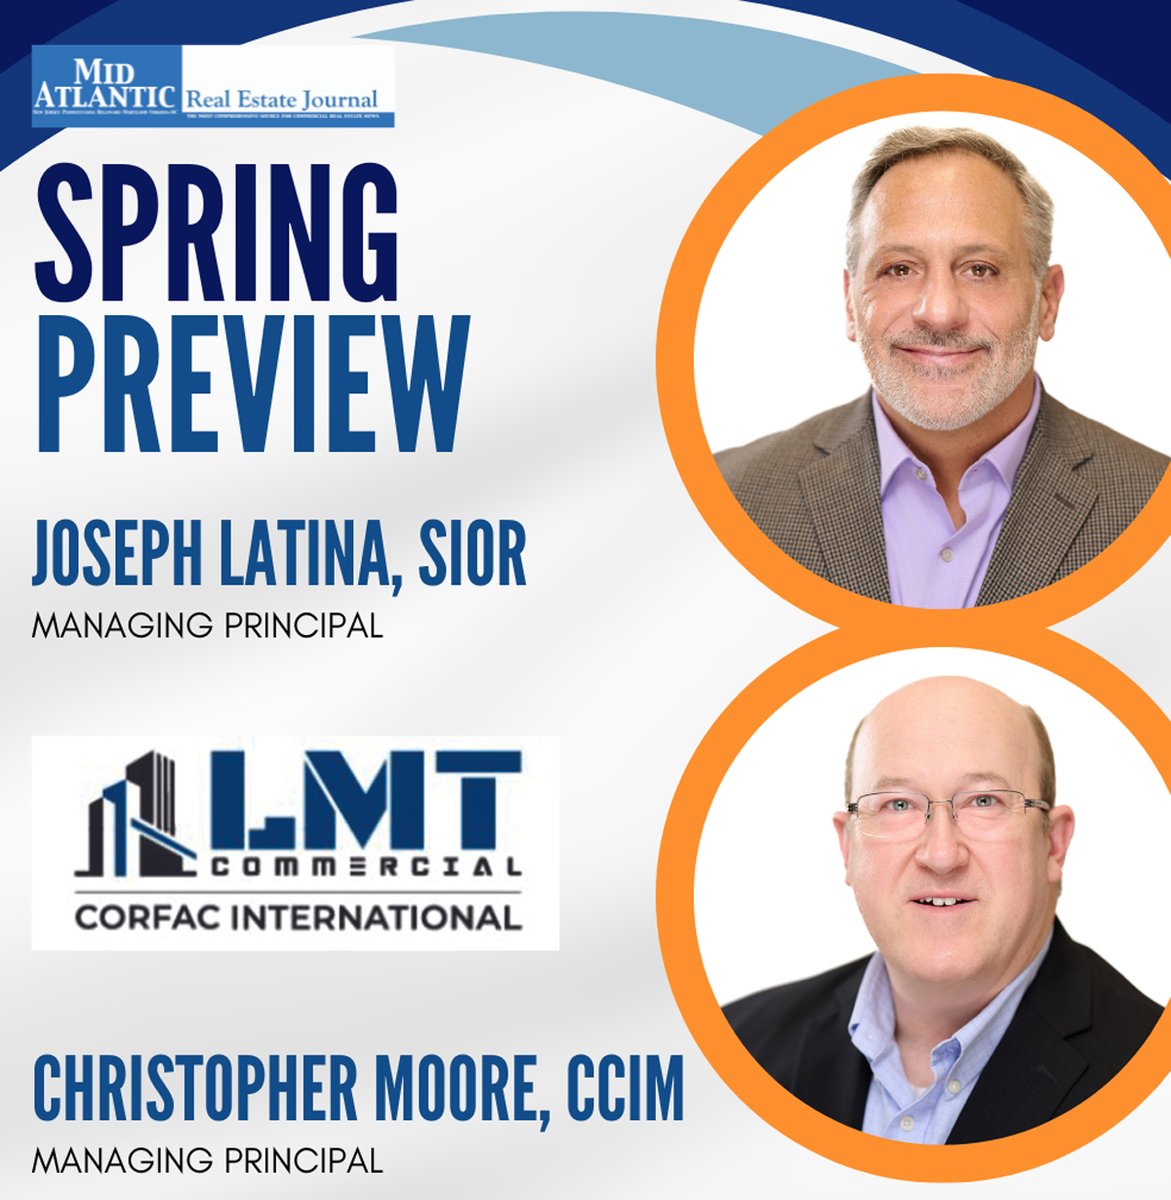 Joseph Latina, SIOR, and Christopher Moore, CCIM of LMT Realty/@CORFACIntl are featured in #MAREJ this month! tinyurl.com/LMT-Corfac Find out more about recent trends in DE's #industrial land prices and their implications for investors and developers. #DelawareEconomy